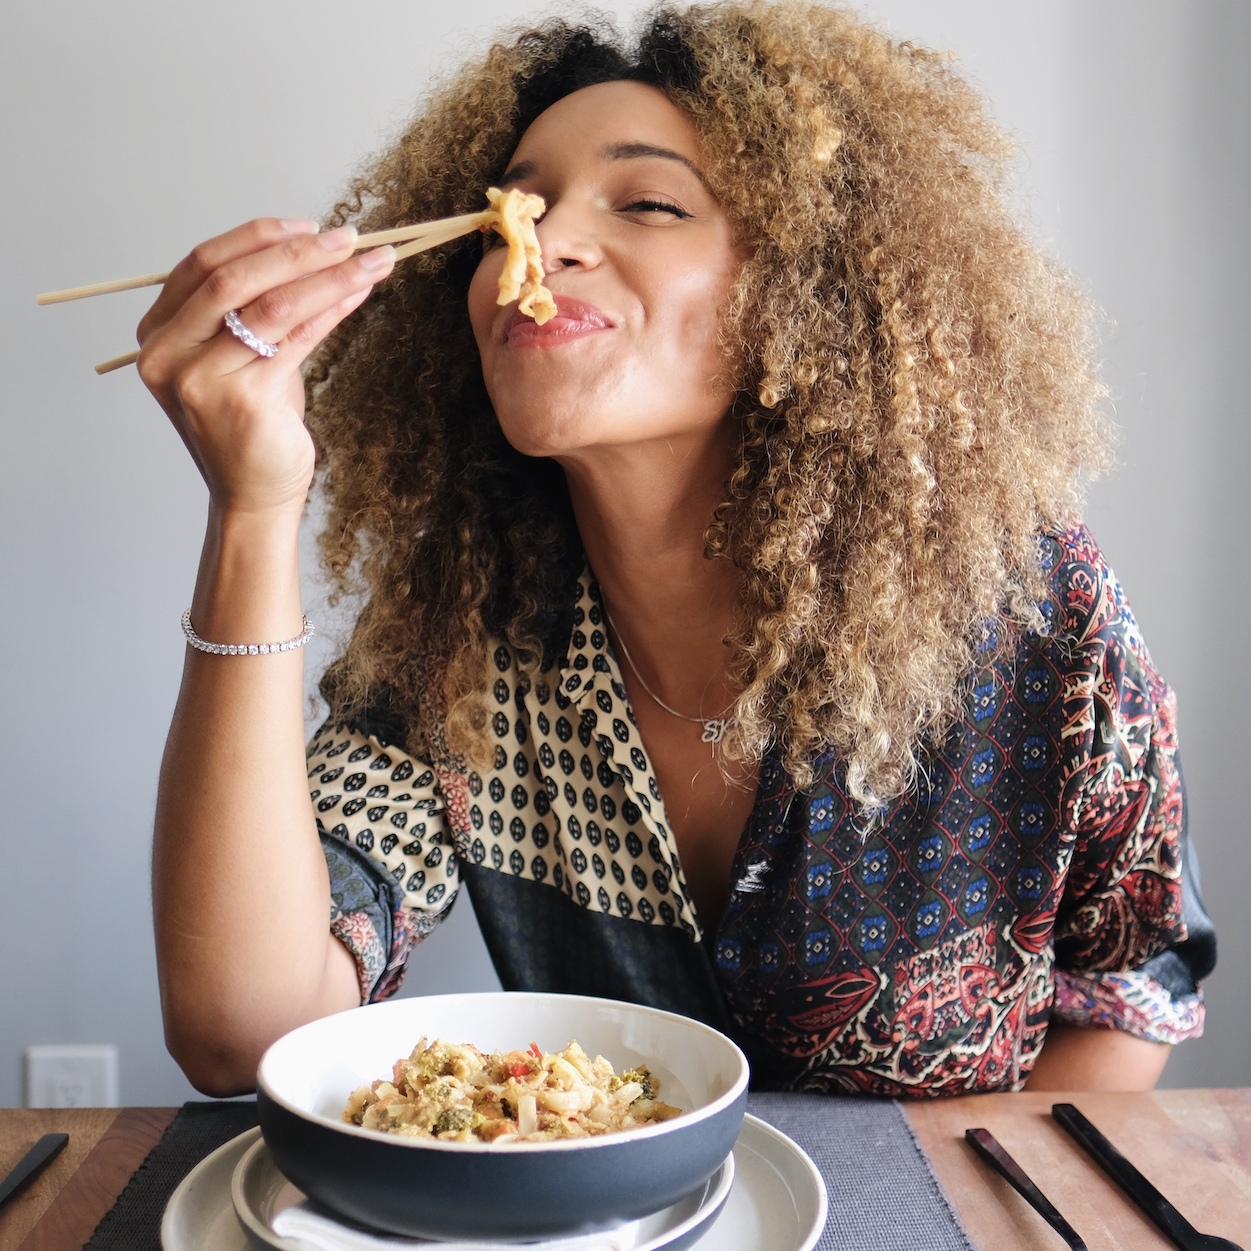 The social media personality Sky Landish smiling and holding a noodle with chopsticks while sitting at a table